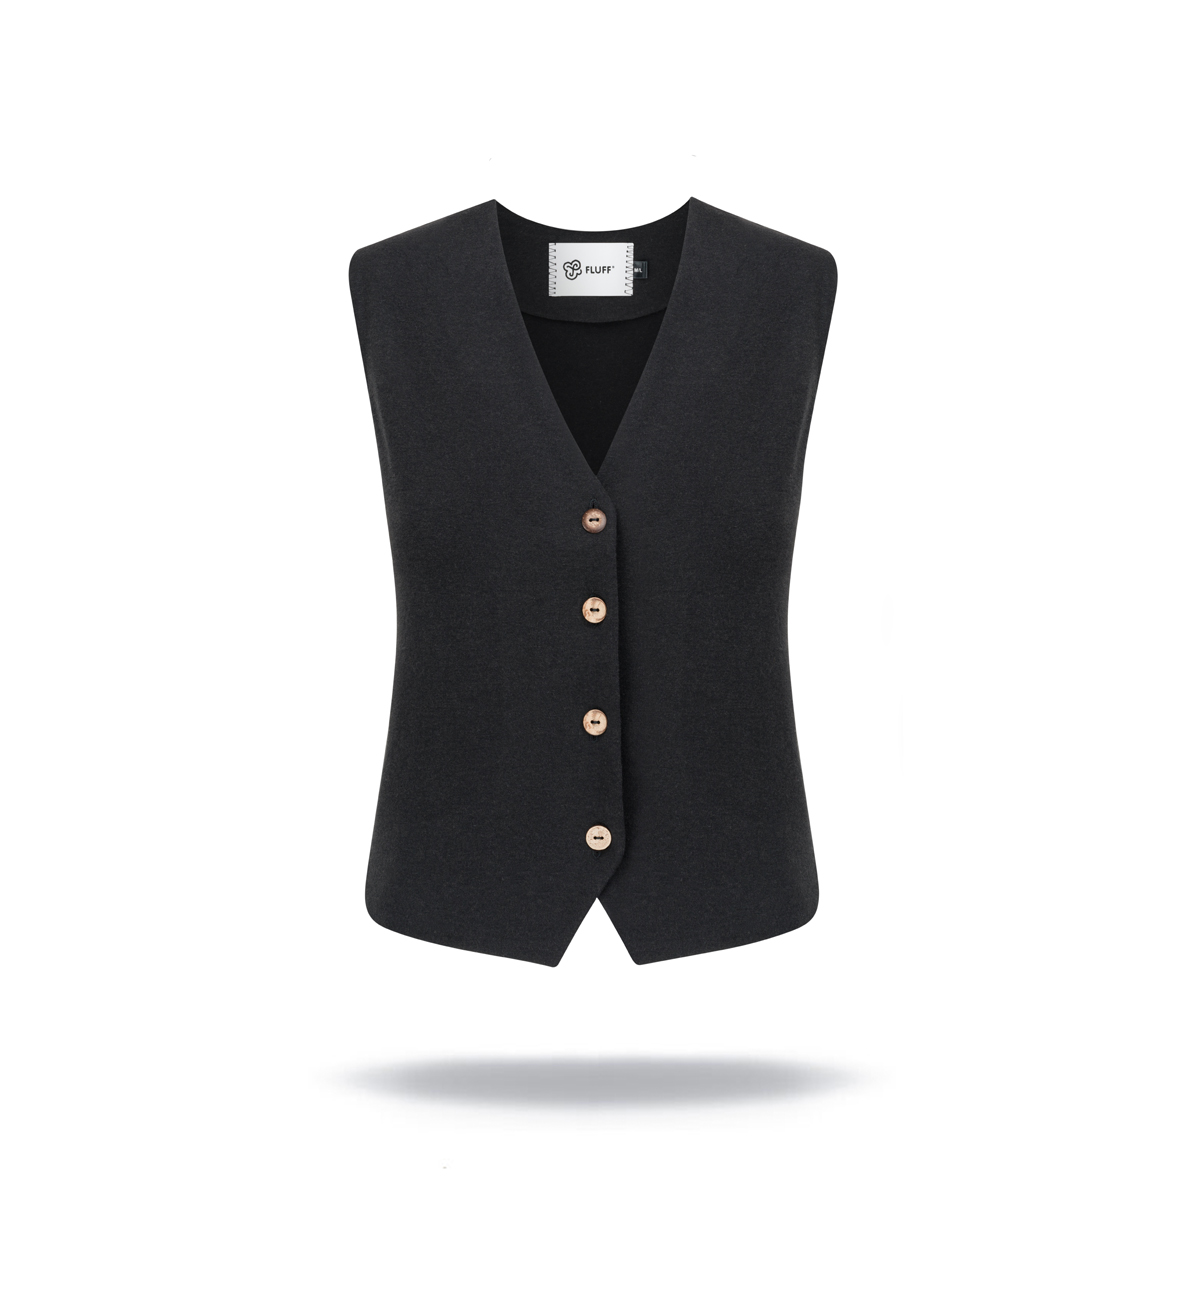 Bamboo sleeveless vest with v-neck and wooden buttons. Fitted cut, black colour.